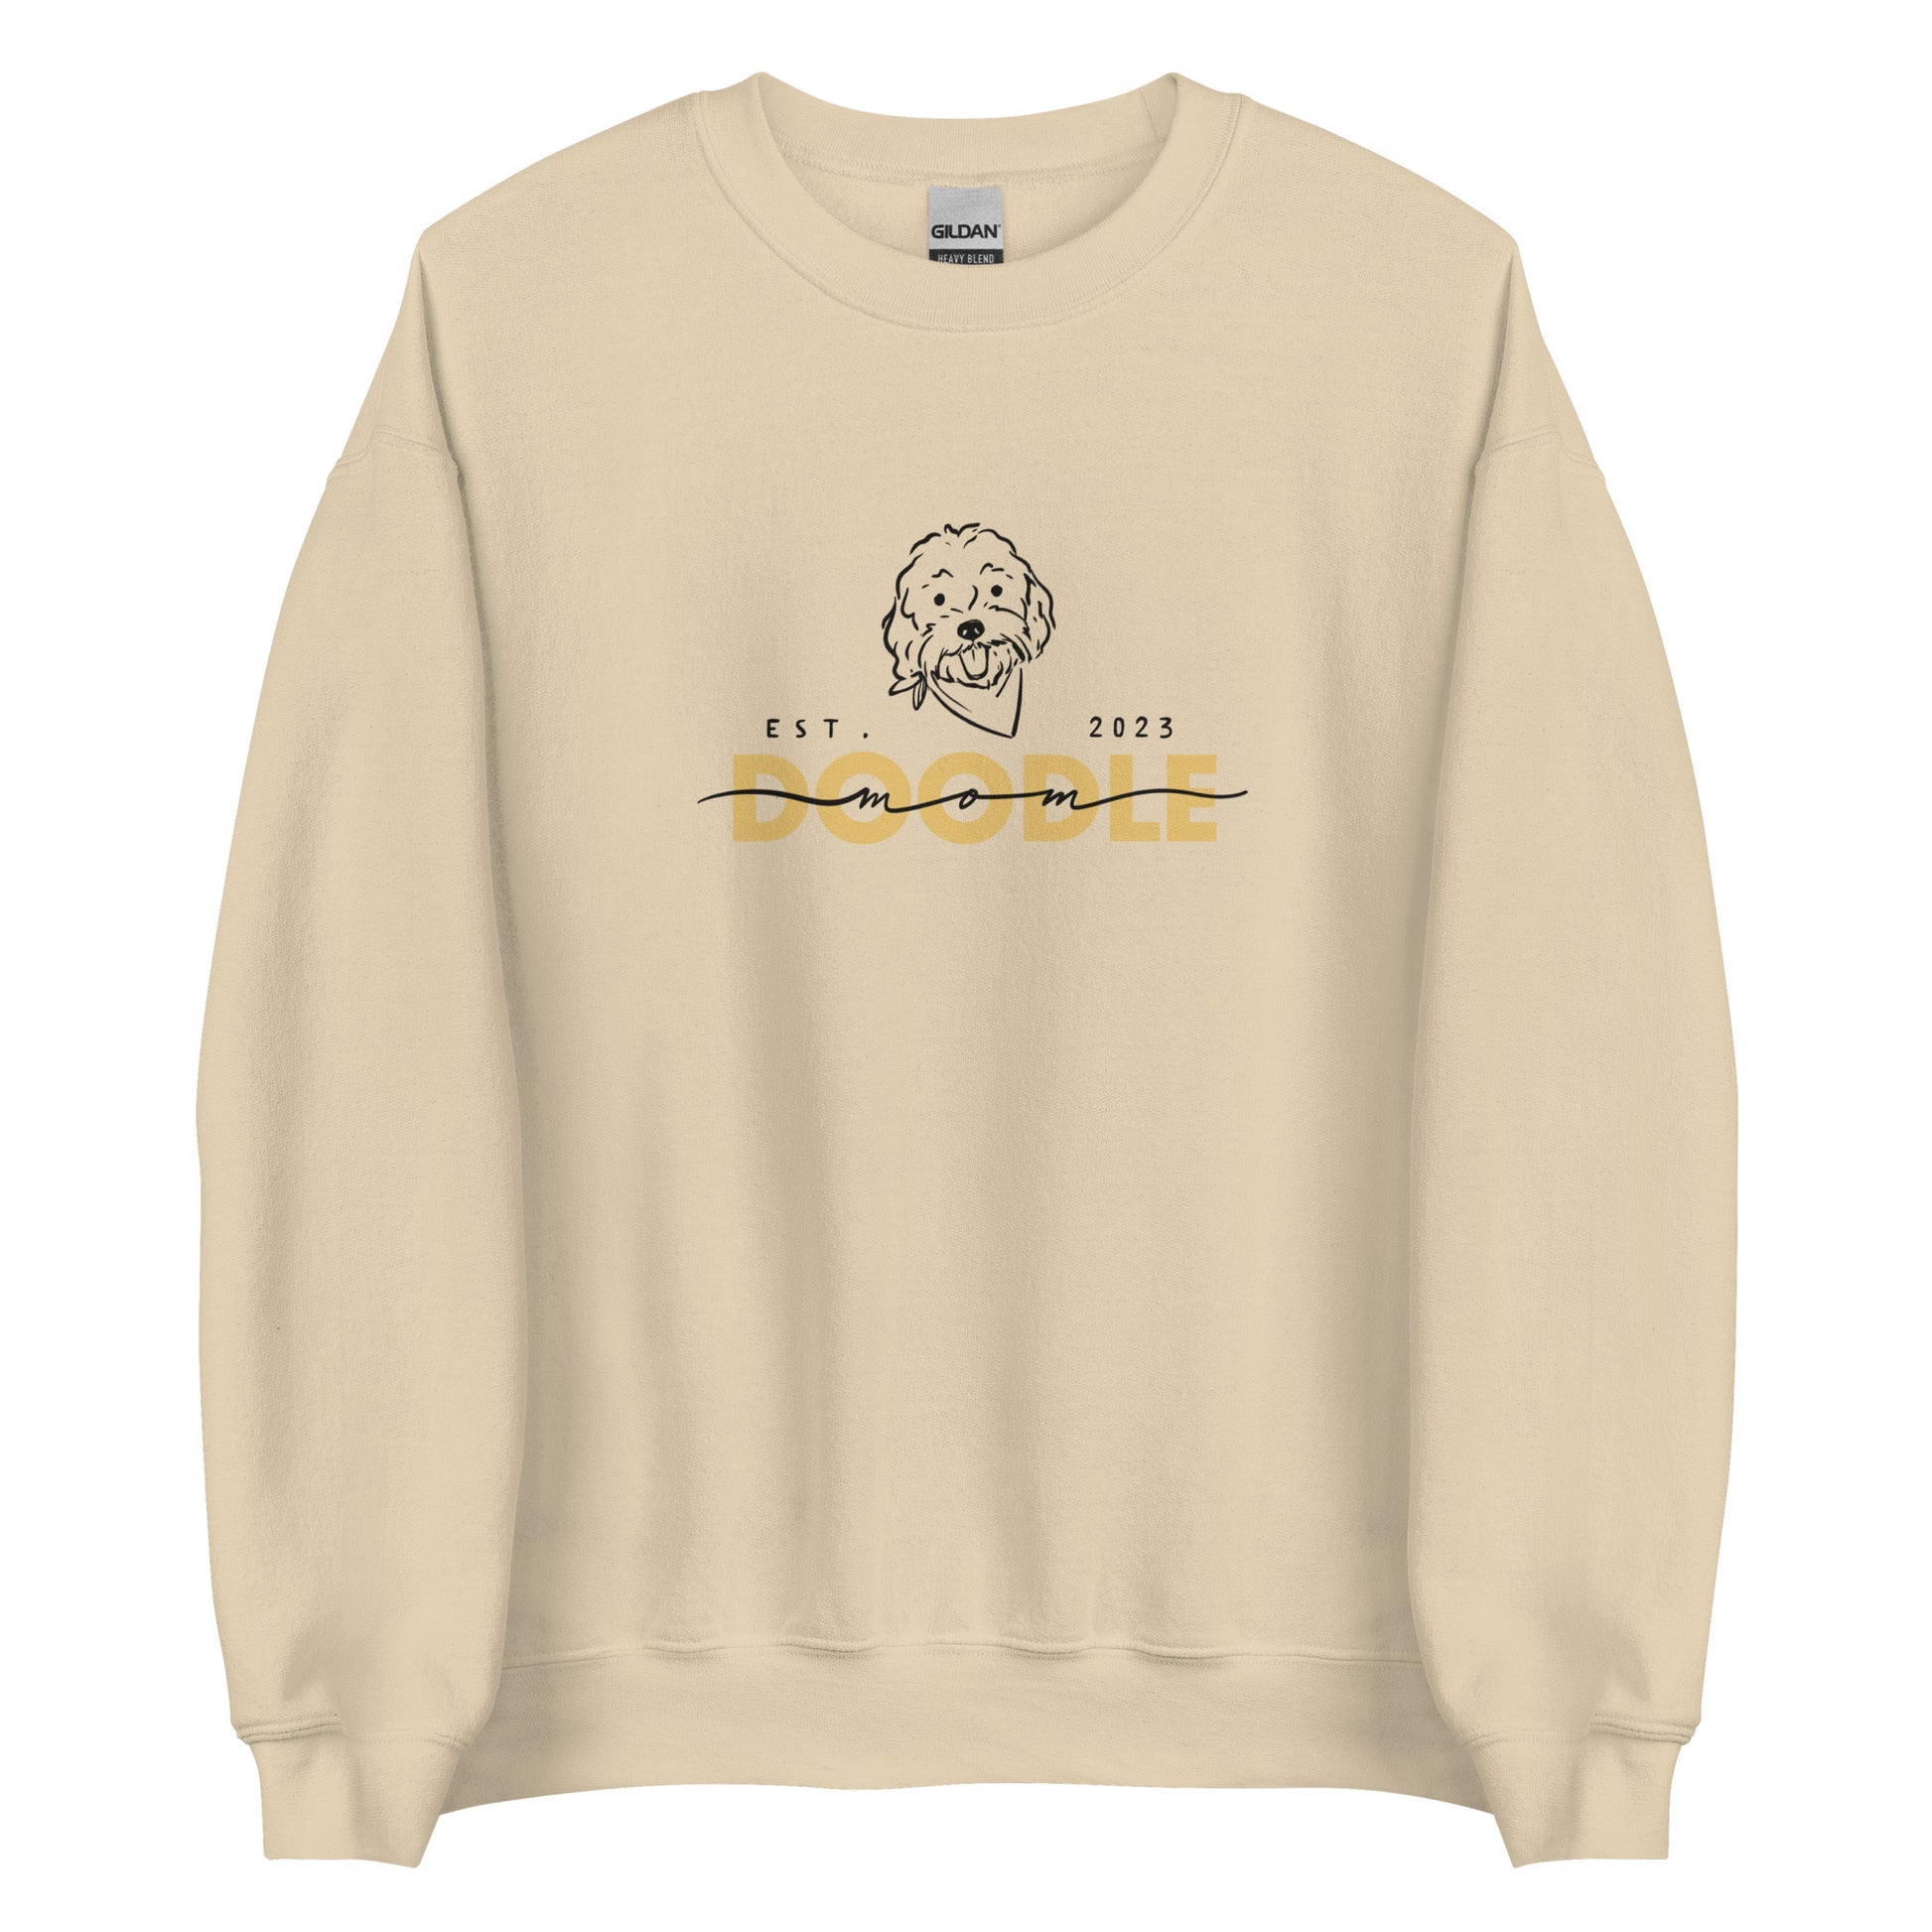 Goldendoodle Mom crew neck sweatshirt with Goldendoodle face and words "Doodle Mom Est 2023" in sand color